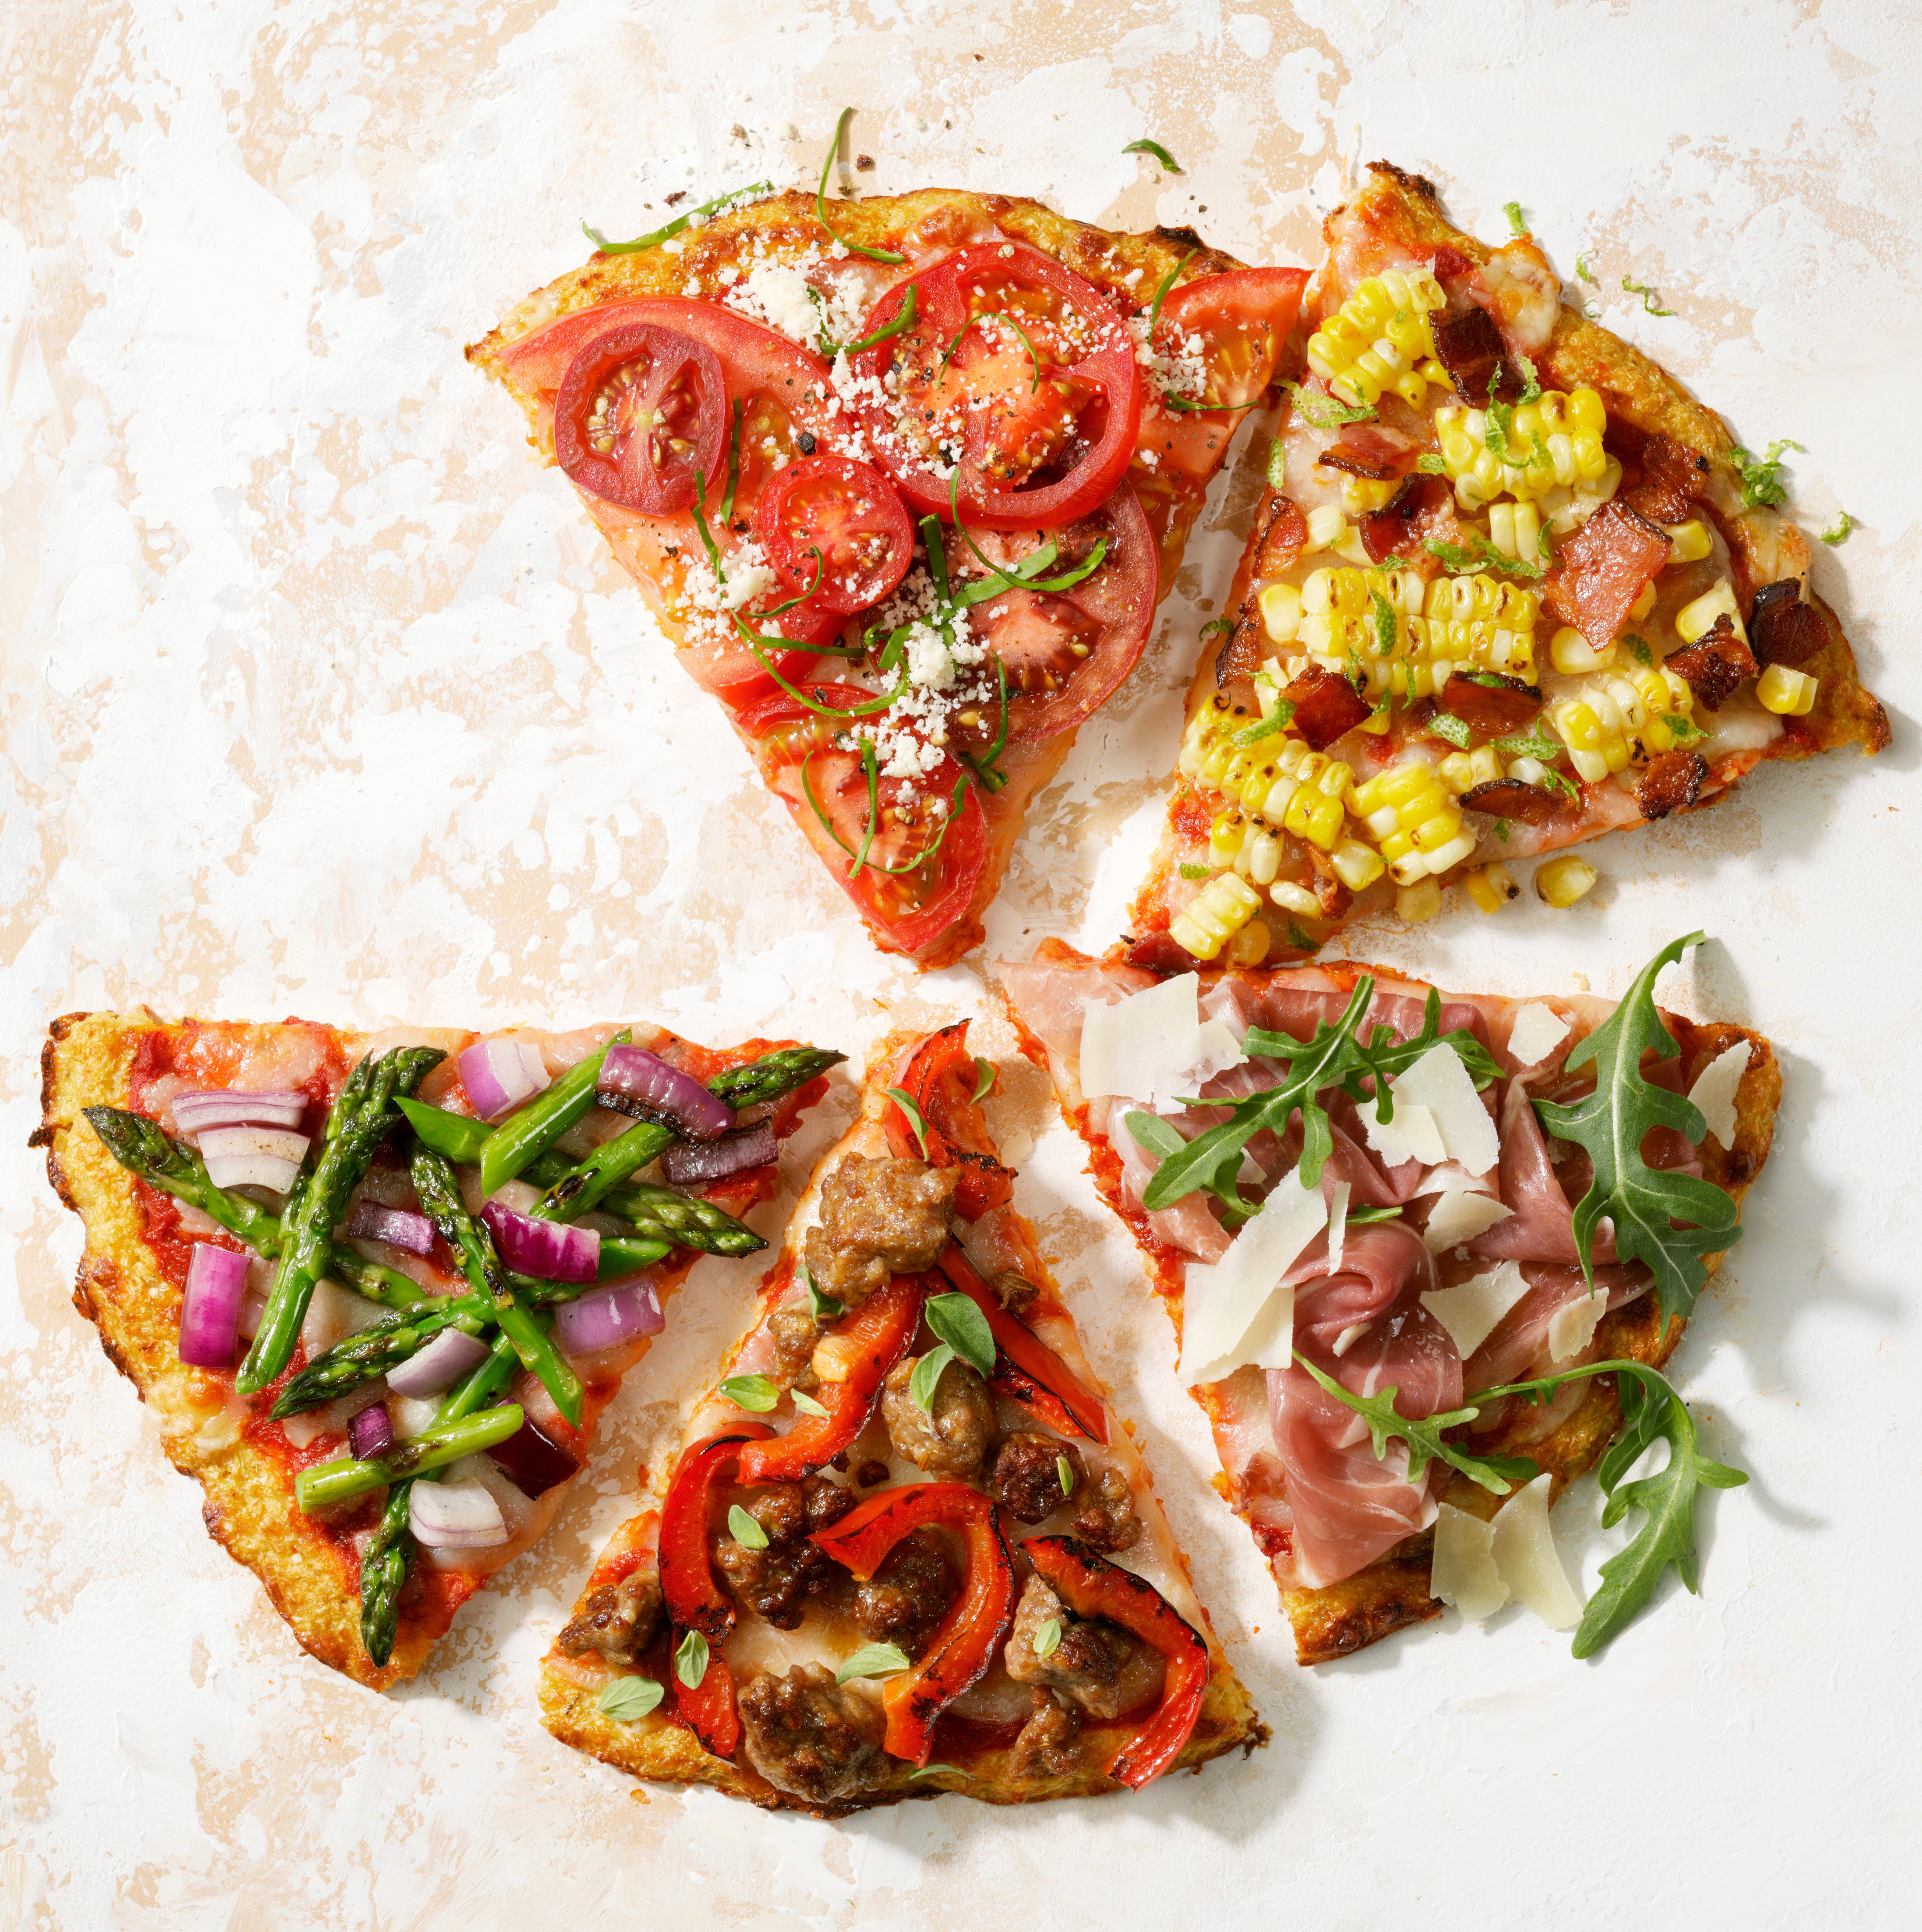 7 Unbelievably Delicious Cauliflower Crust Pizza Ideas Taste Of Home,Cracklings Filipino Chips